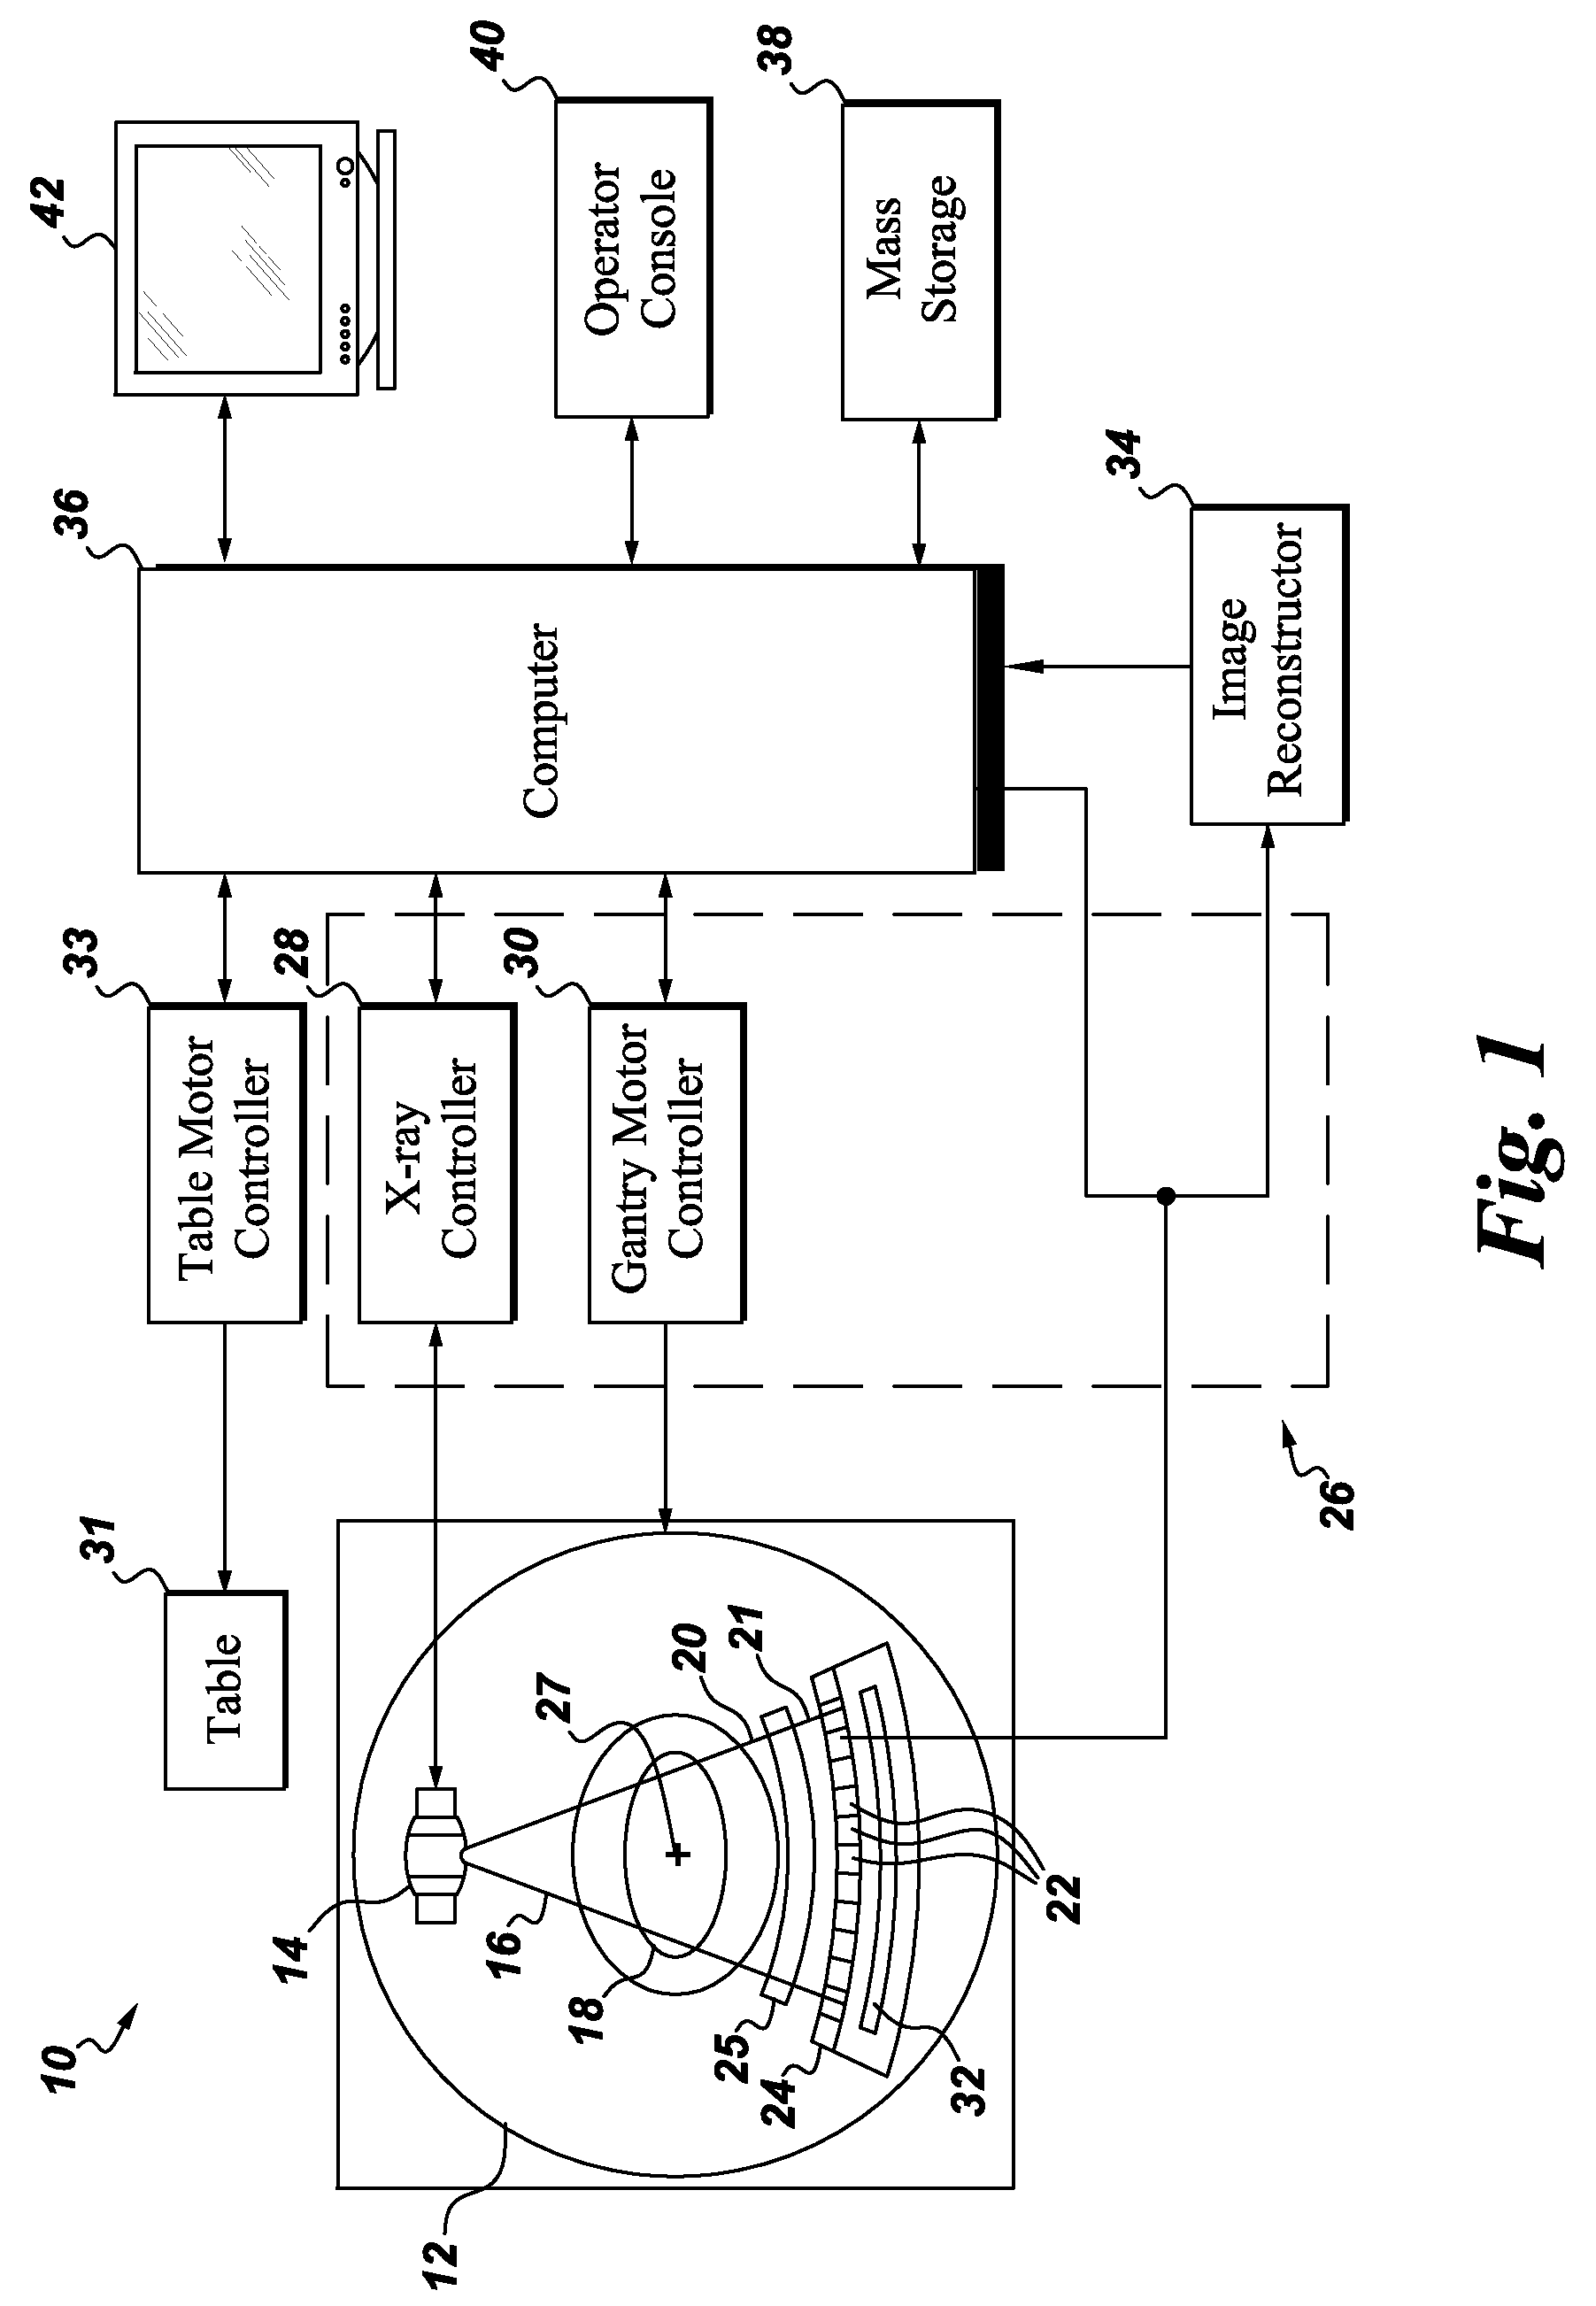 Method for energy sensitive computed tomography using checkerboard filtering